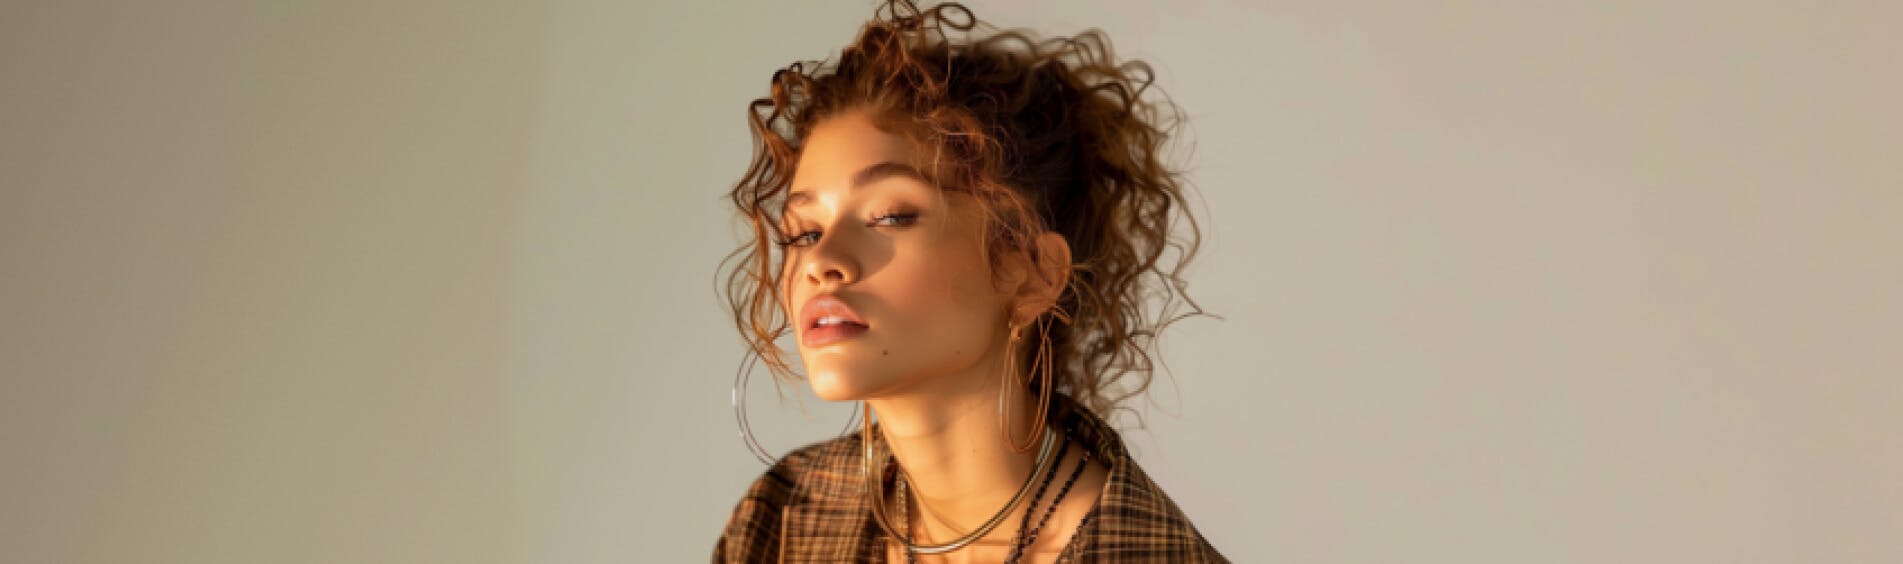 Cover Image for Nothing But A Rose: Zendaya Wears A Rose For The Vogue Cover